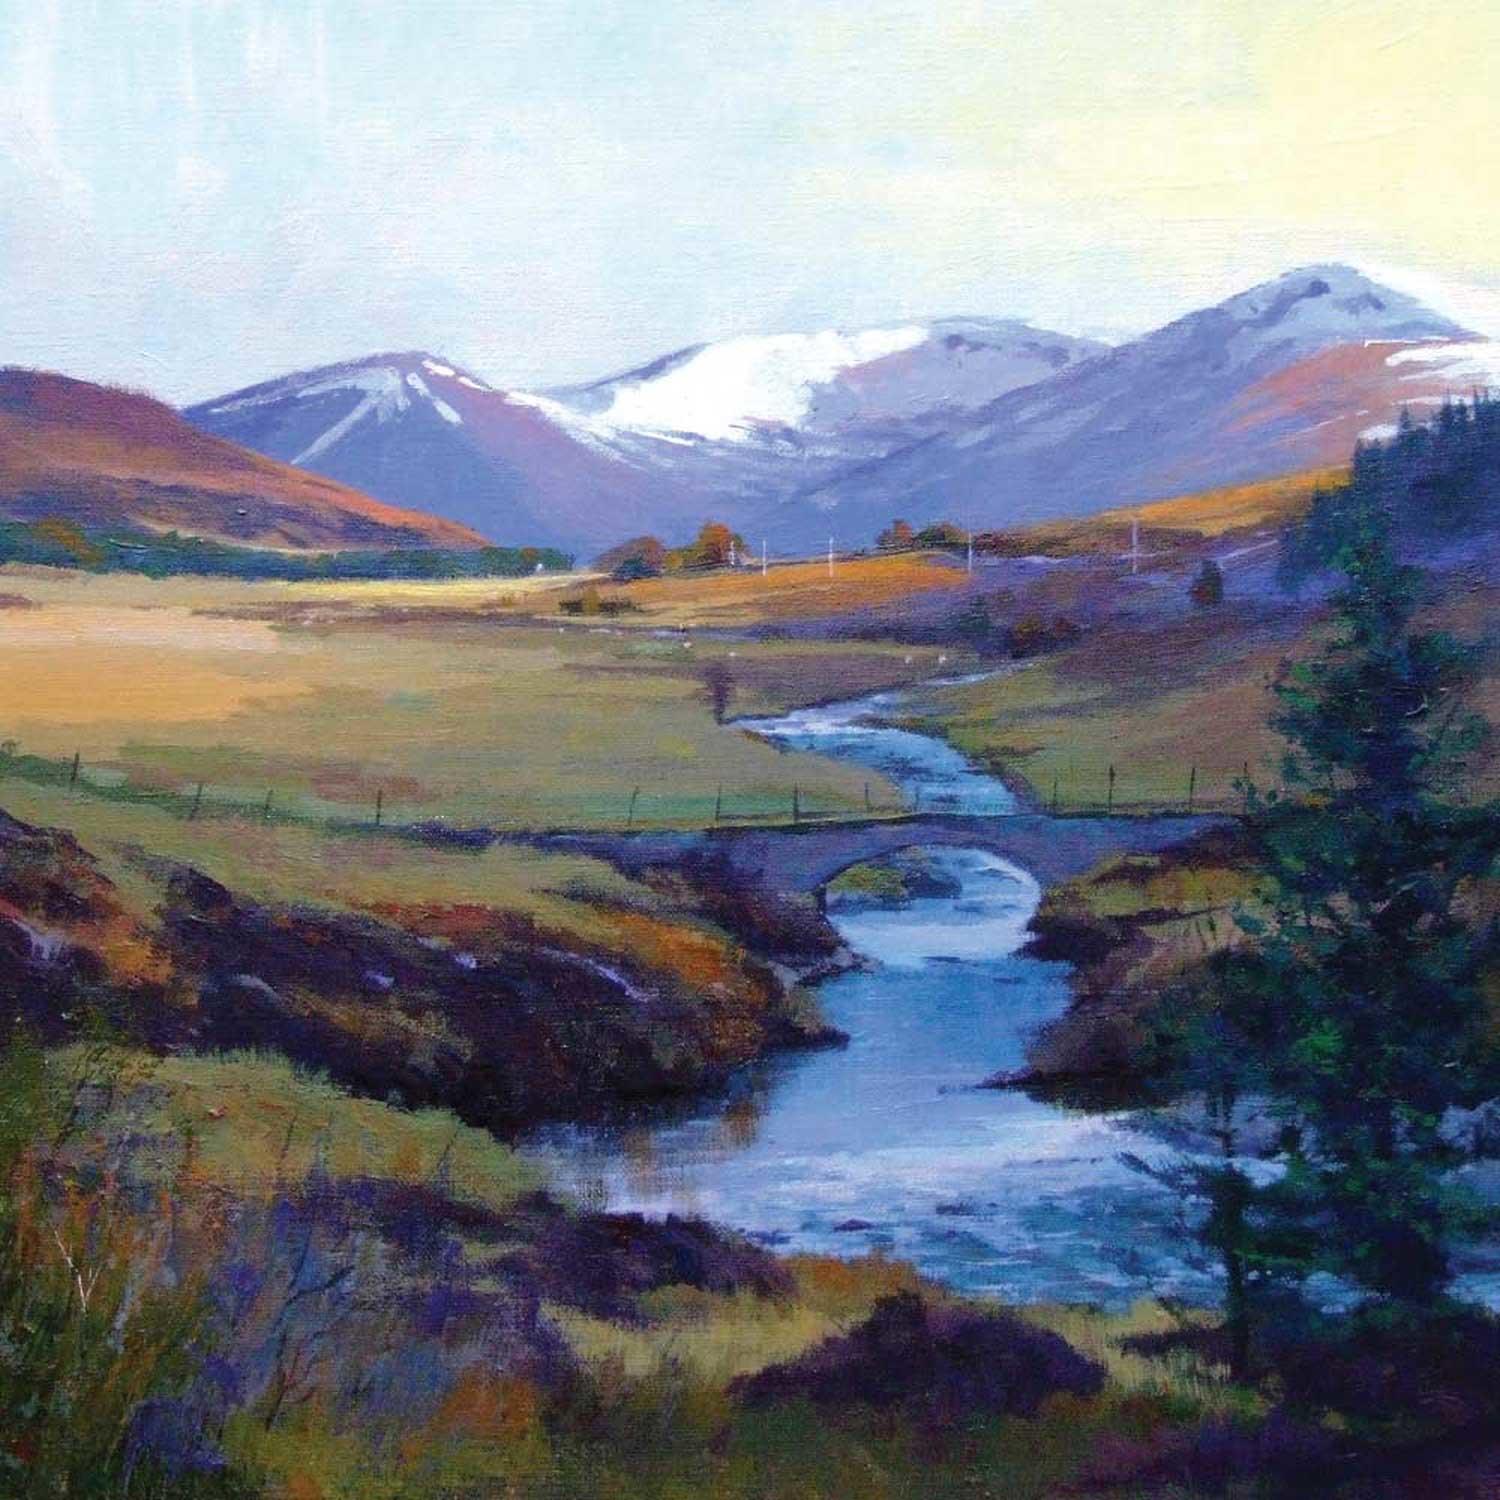 Afternoon Sunlight, Dalwhinnie by Colin Robertson